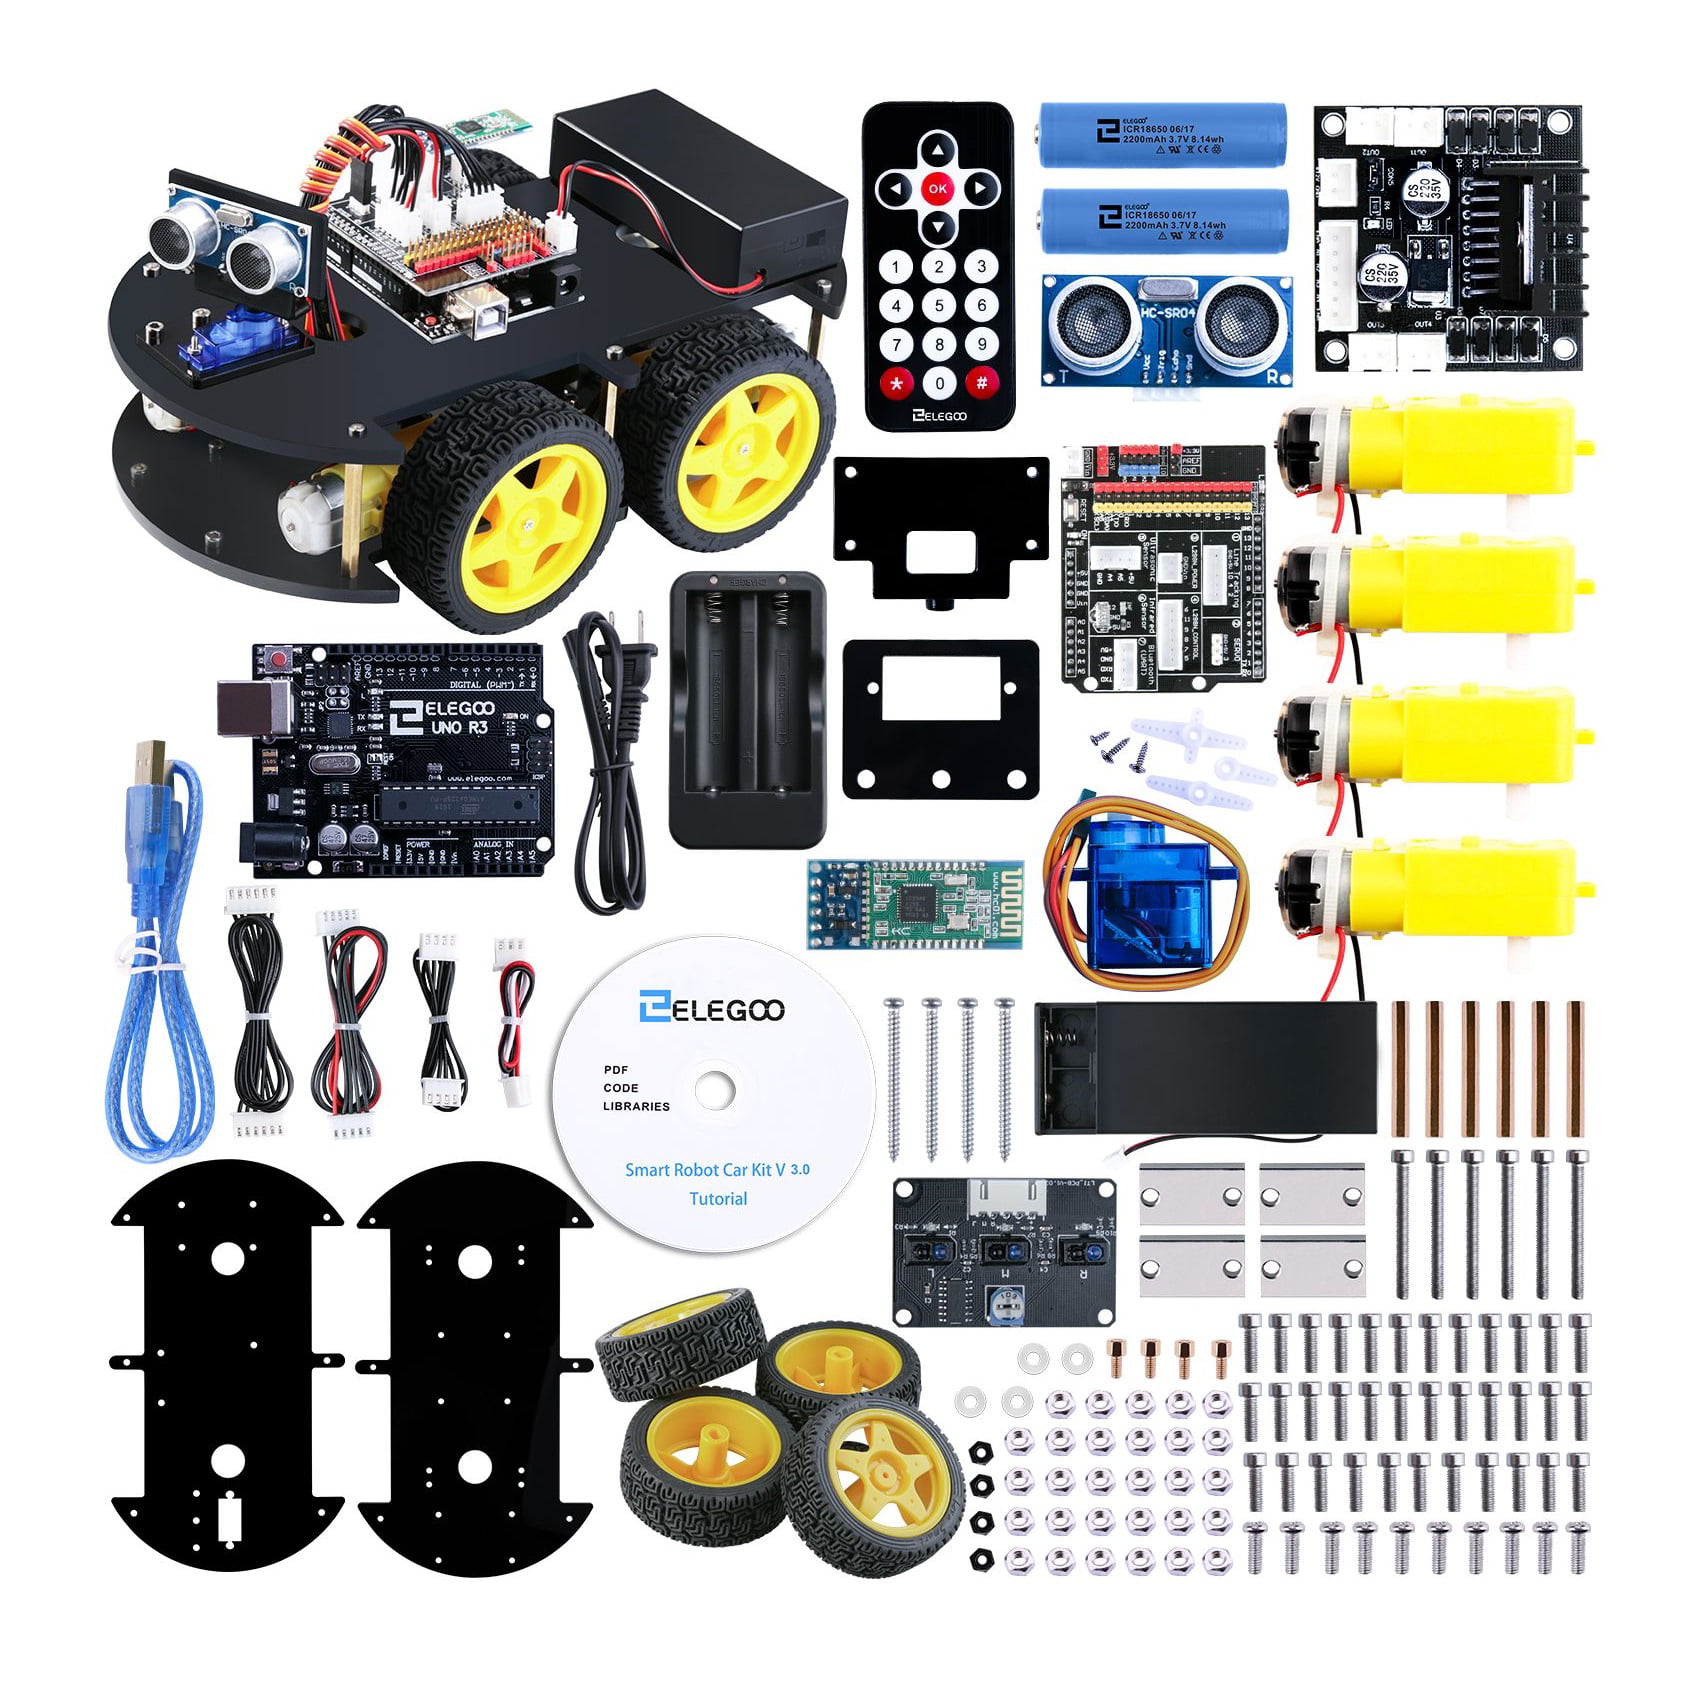 ELEGOO UNO R3 Project Smart Robot Car Kit 3.0 Plus with UNO R3, Line Tracking Module, Ultrasonic Sensor, IR Remote Control etc. Intelligent and Educational Toy Car Robotic Kit for Arduino